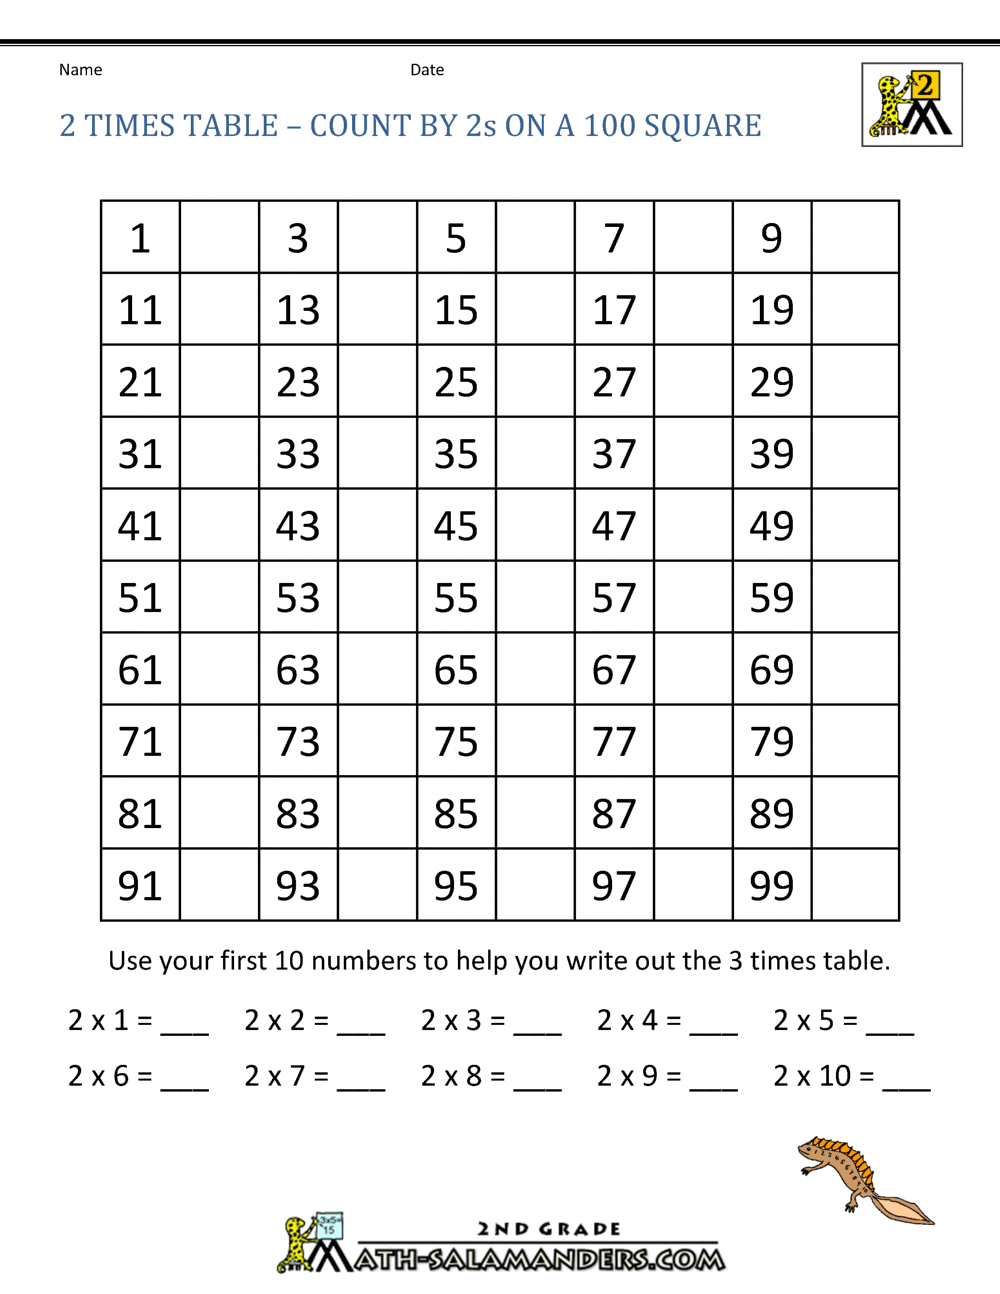 multiplication chart by 2